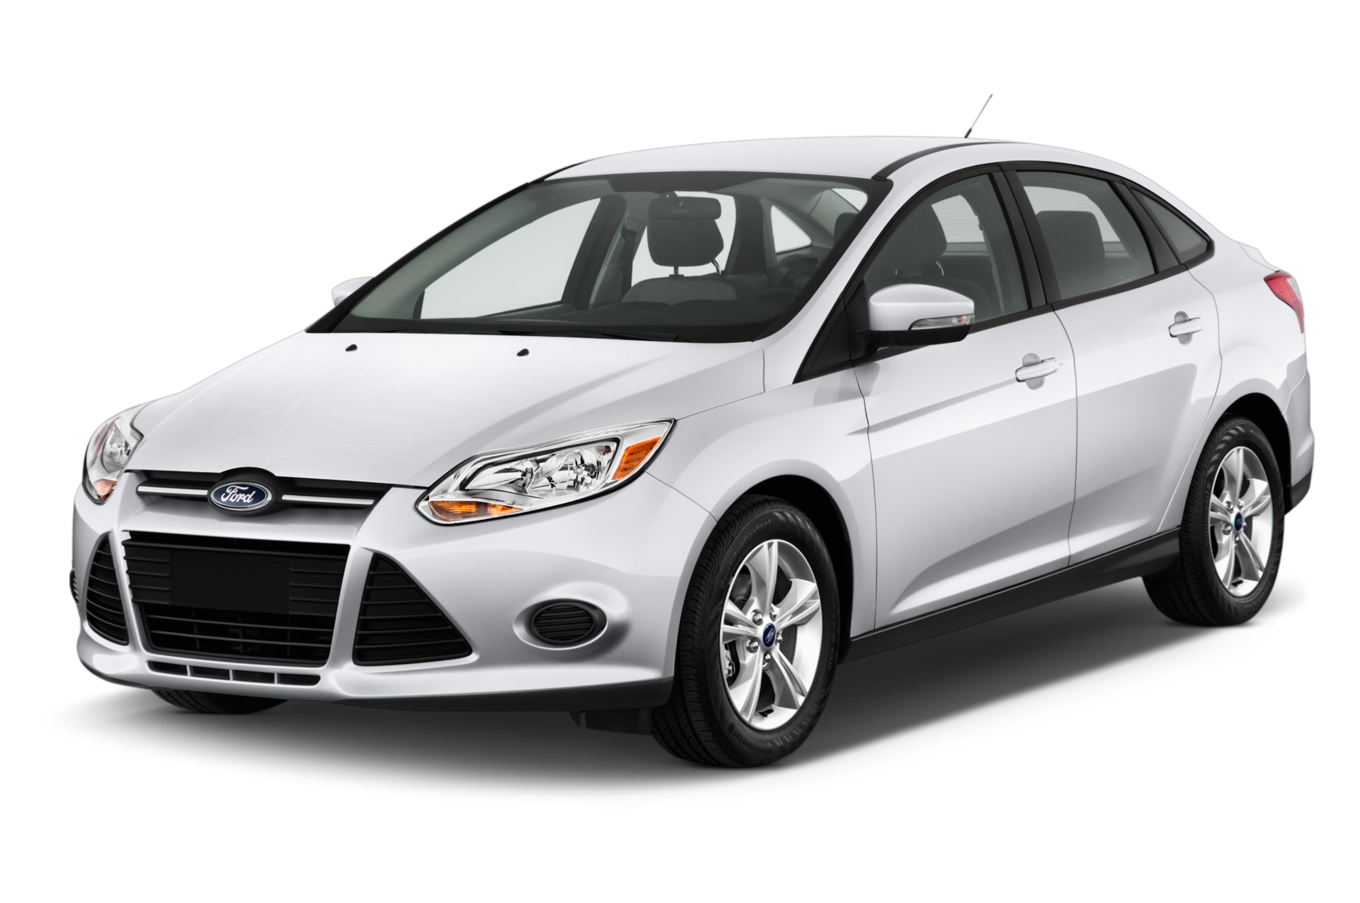 2014 Ford Focus Sedan SE 0-60 Times, Top Speed, Specs, Quarter Mile, and  Wallpapers - MyCarSpecs United States / USA